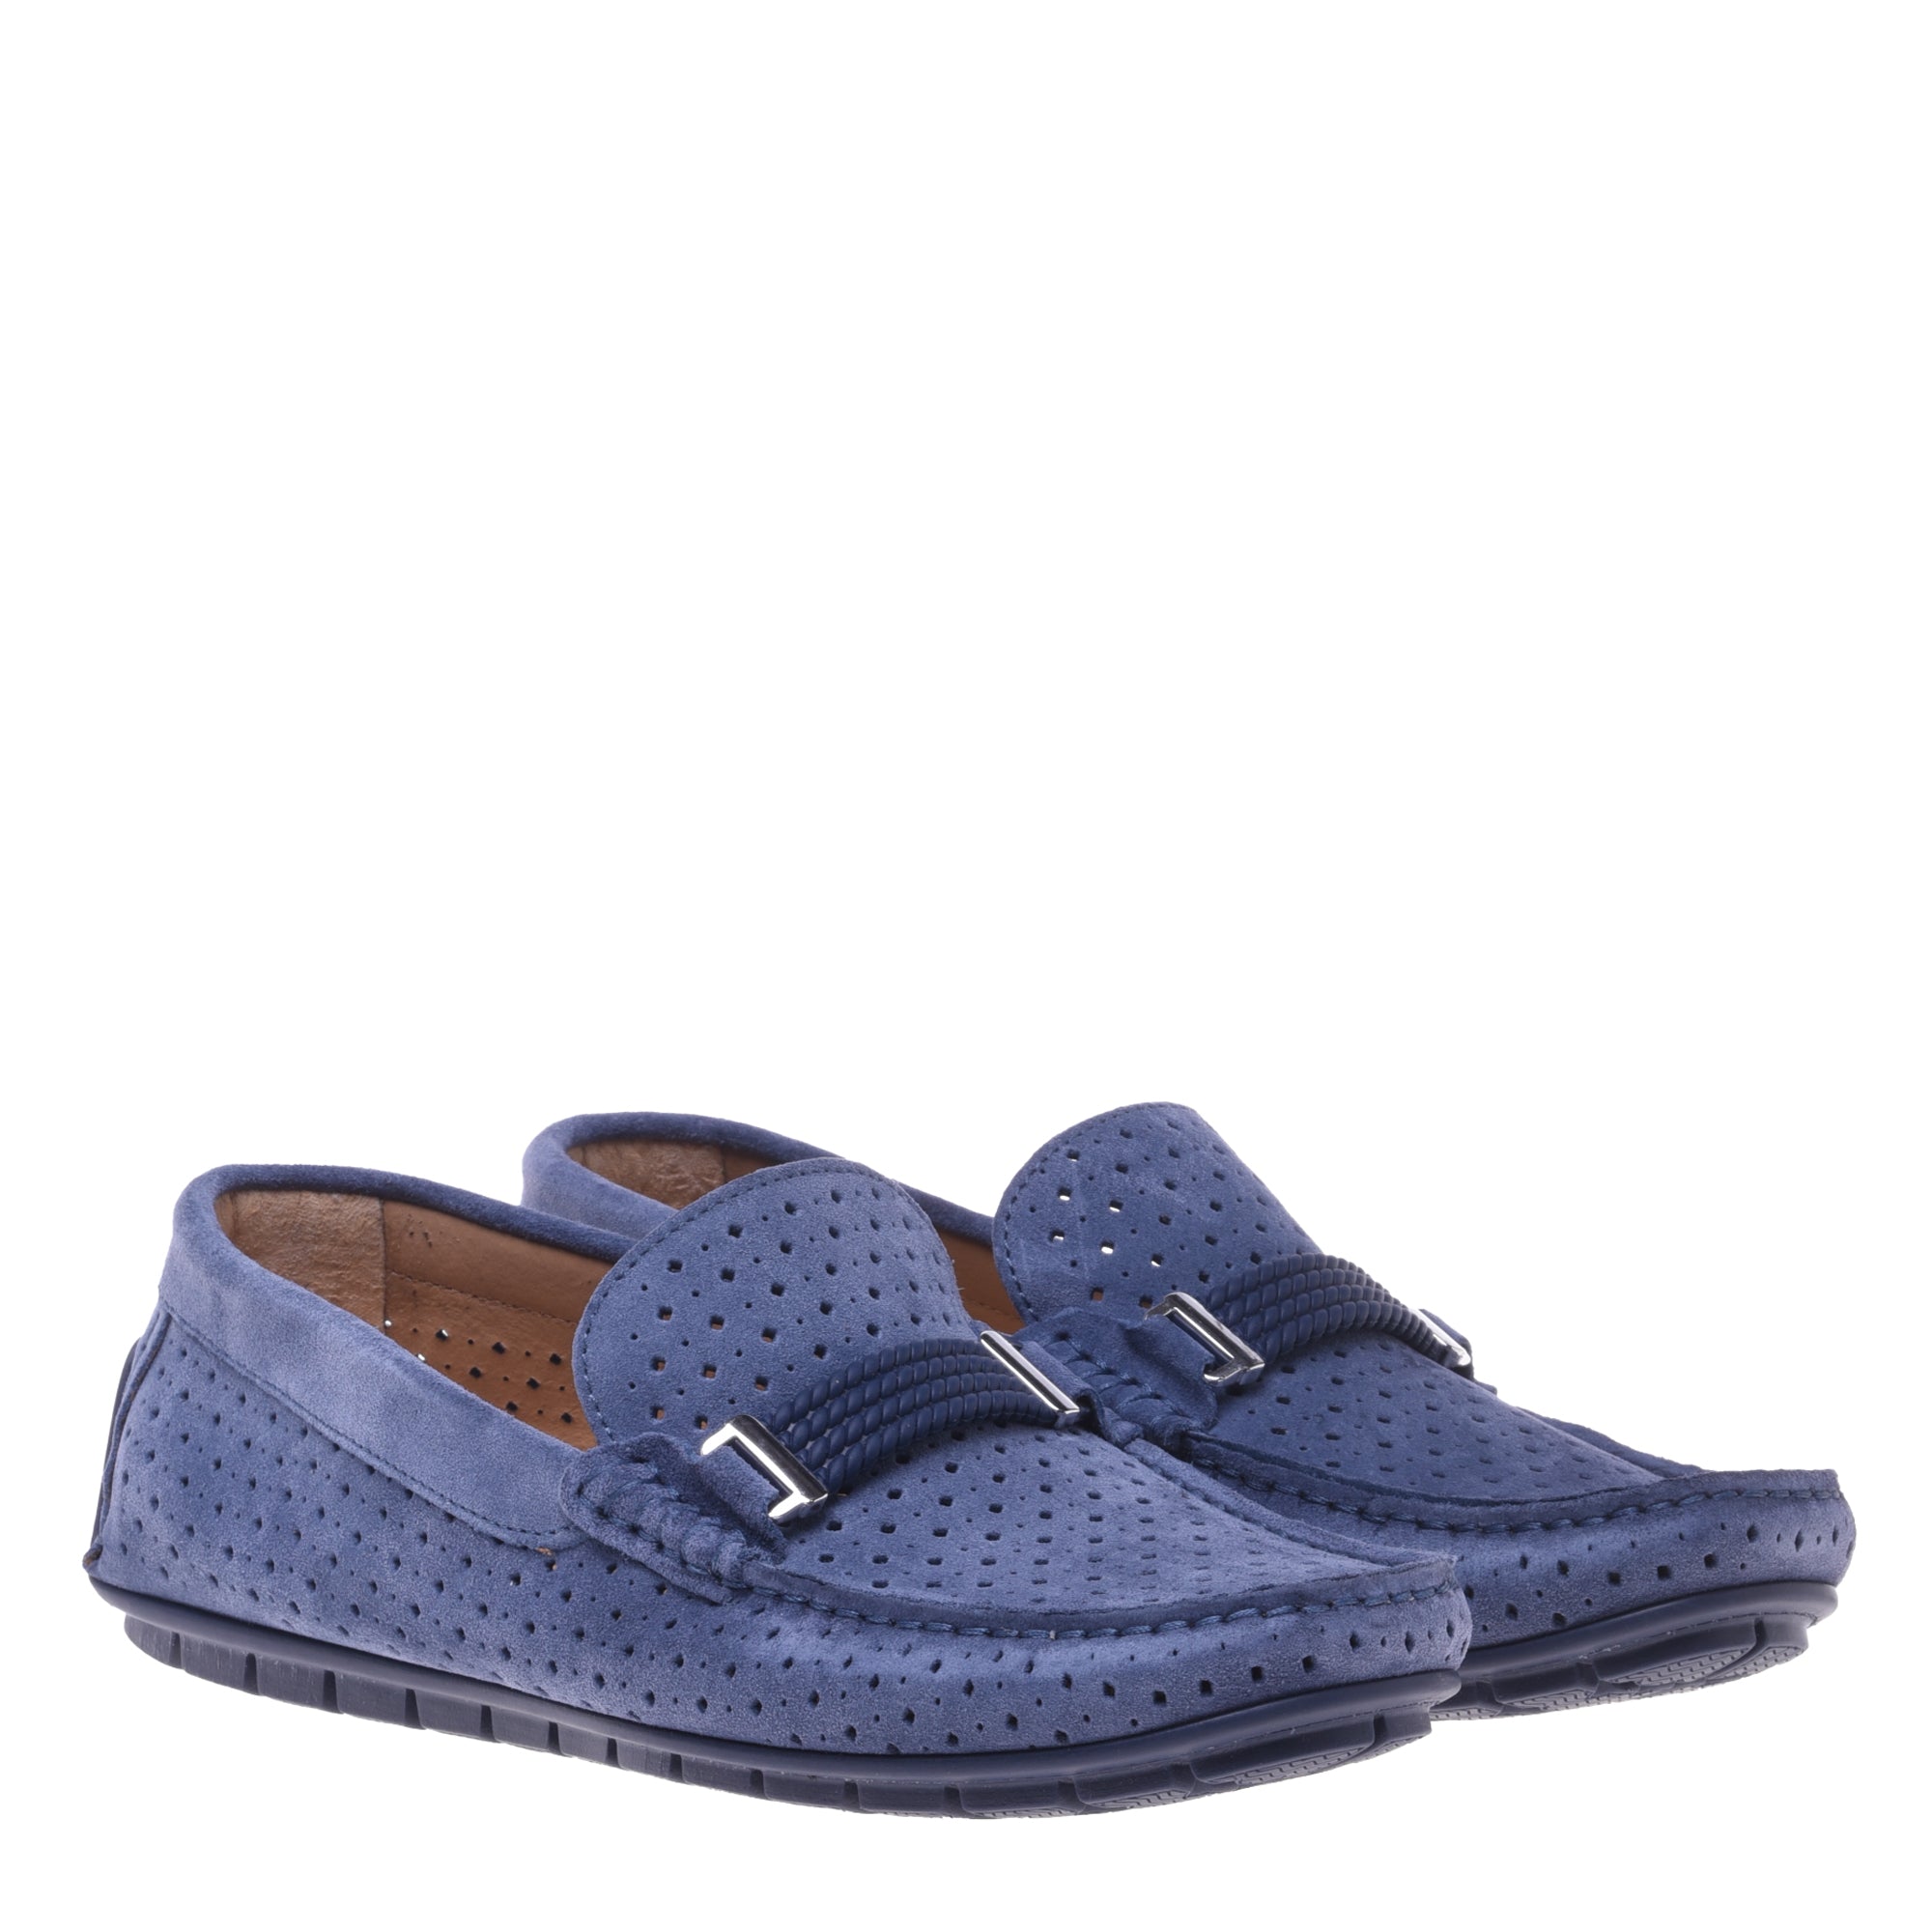 Loafer in denim perforated suede